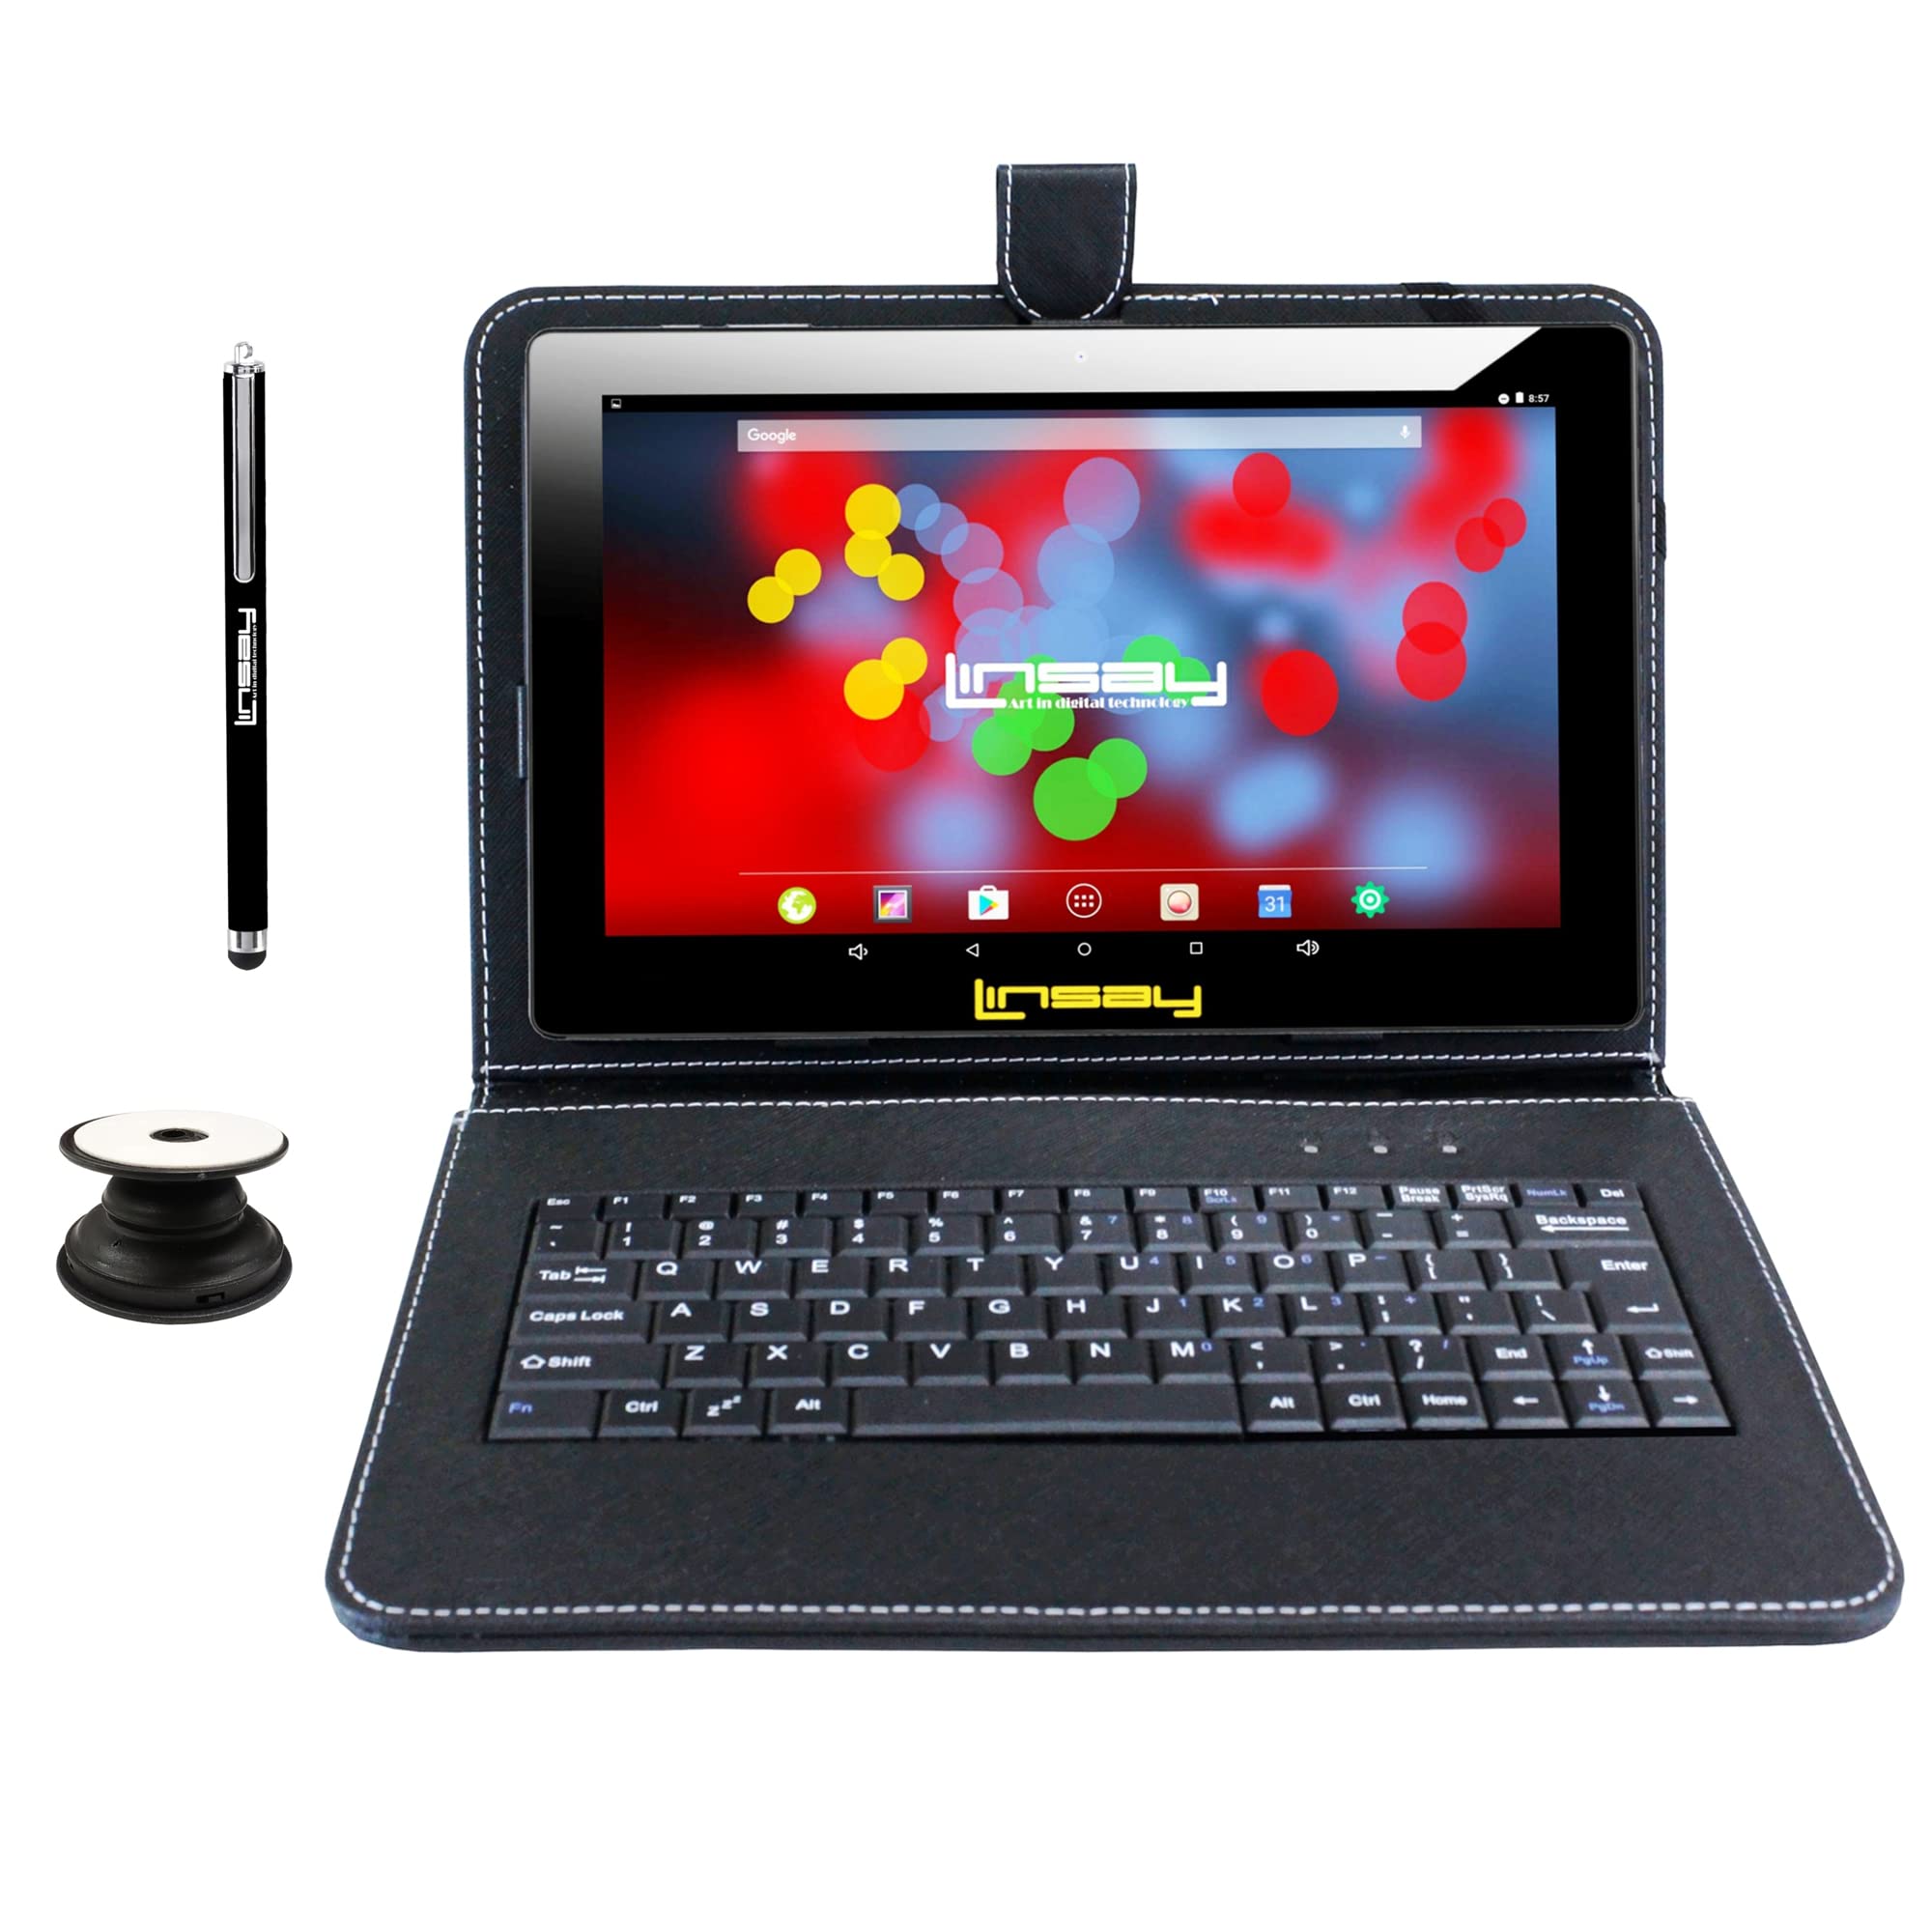 LINSAY 10.1" 1280x800 IPS 2GB RAM 32GB Android 11 Tablet with Black Keyboard, Backpack, Pop Holder and Pen Stylus